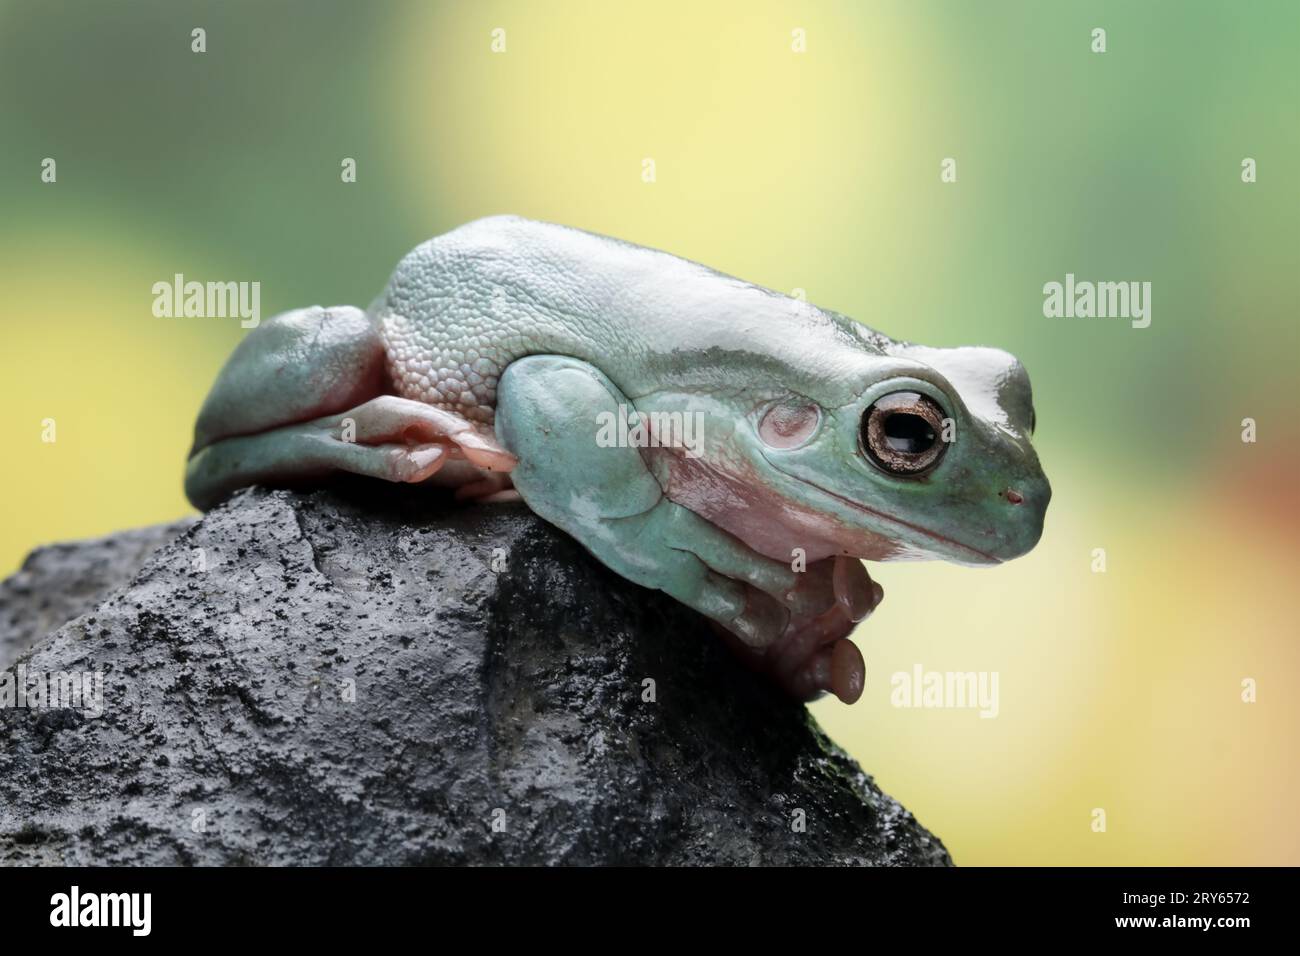 Dumpy frog sitting on a rock on a colored background Stock Photo